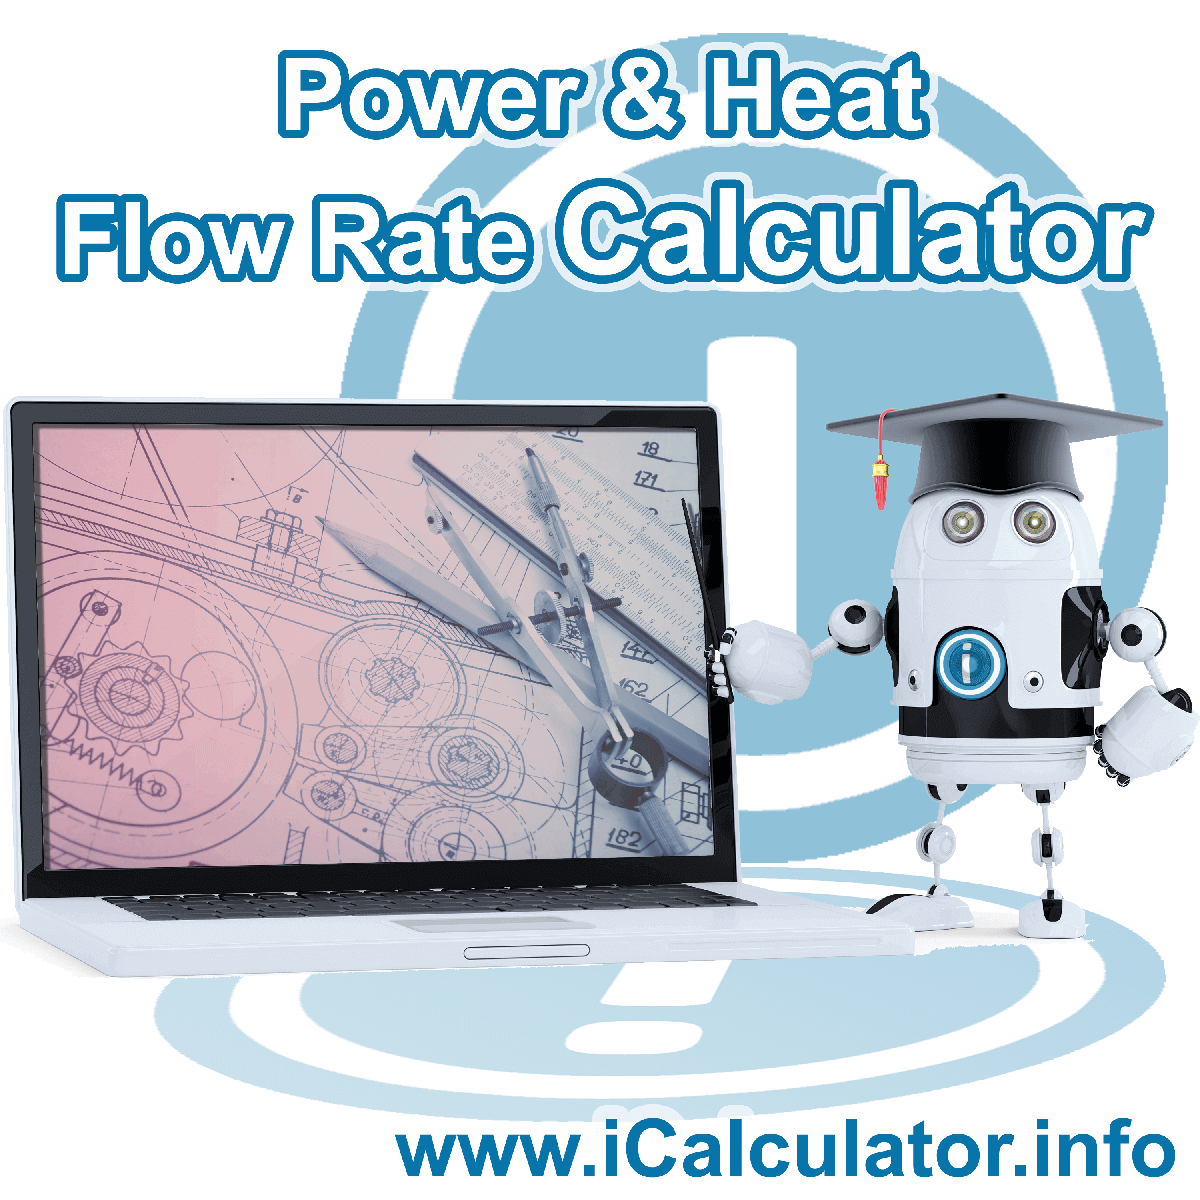 Power and Heat Flow Rate Conversion Calculator: This image showsPower and Heat Flow Rate Conversion formula and algorythms associated calculations used by the Power and Heat Flow Rate Conversion Calculator